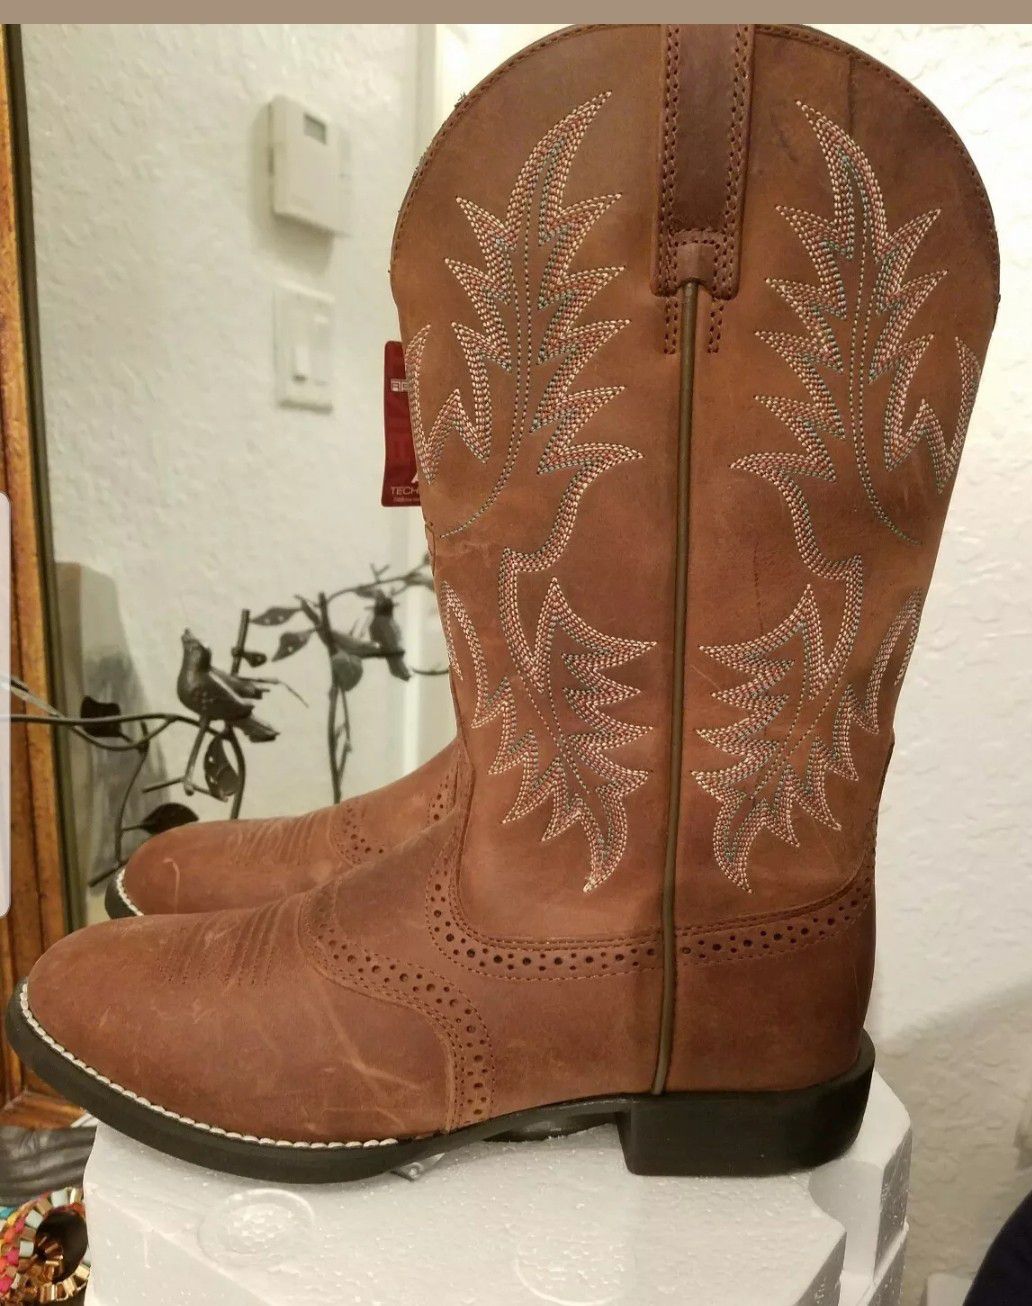 Ariat Heritage Stockman Saddle Vamp Cowgirl Boot - size 6M